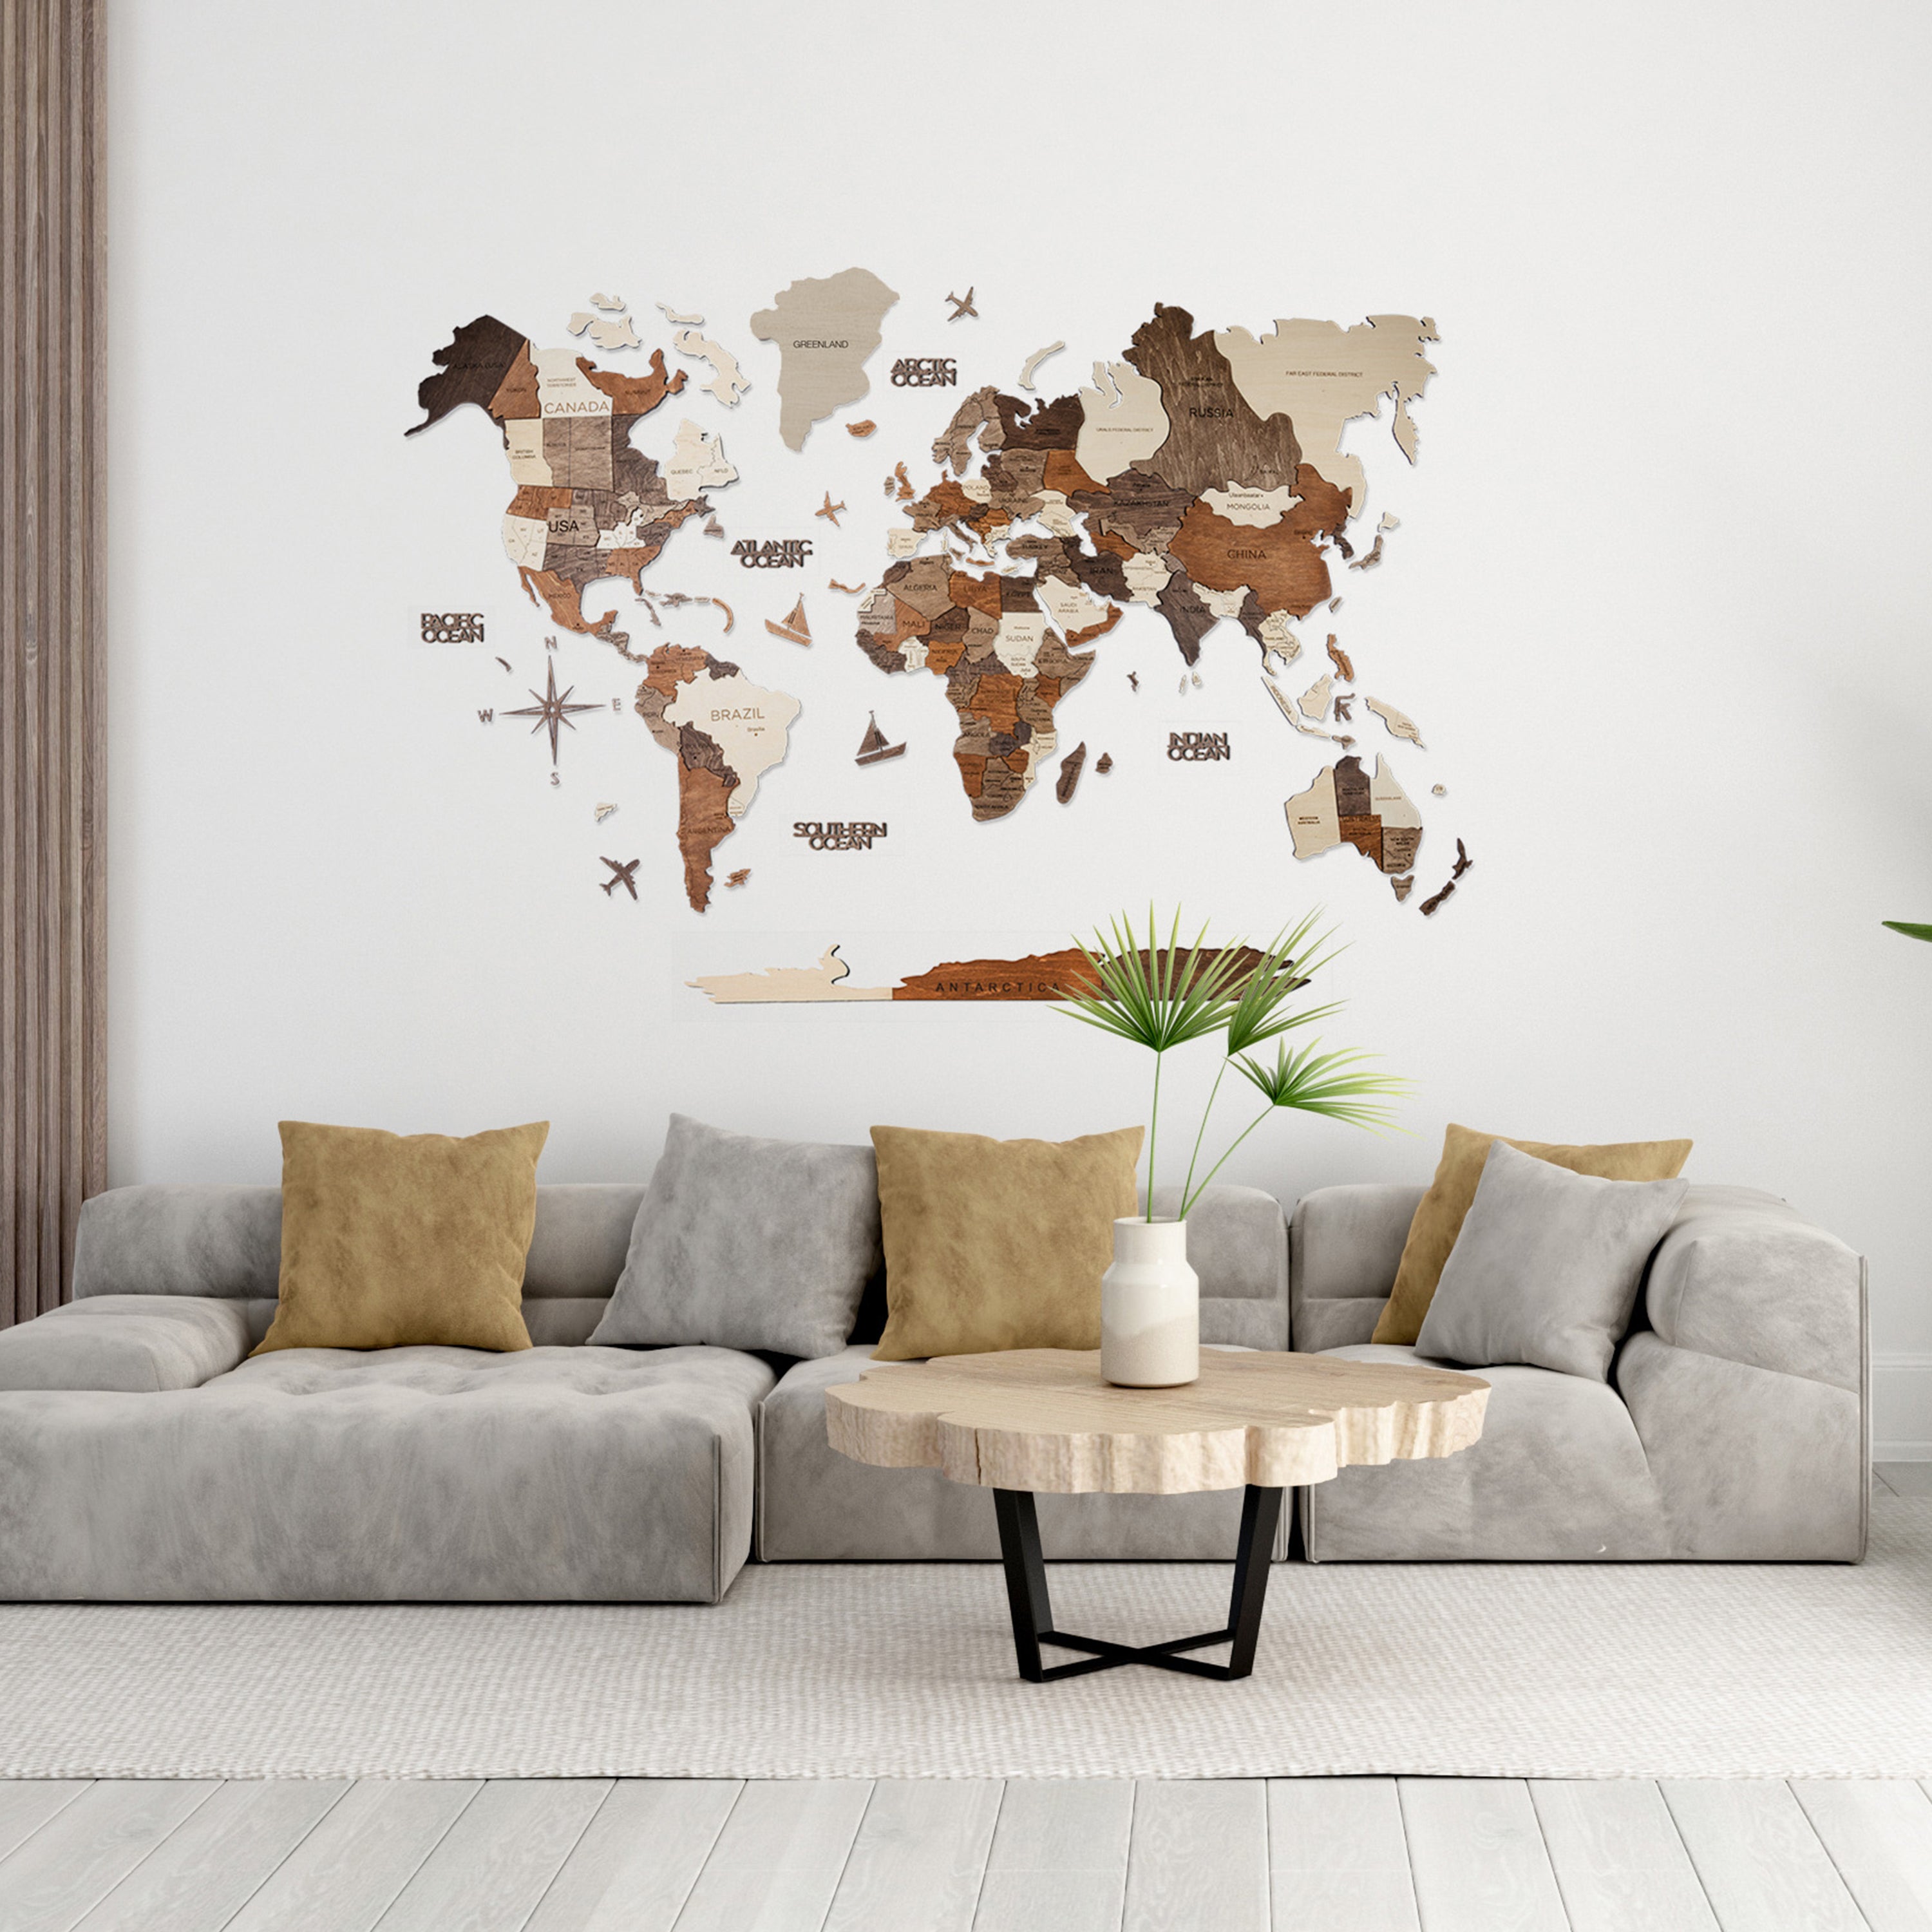 3D Wooden World Map Cappuccino – Awesometik